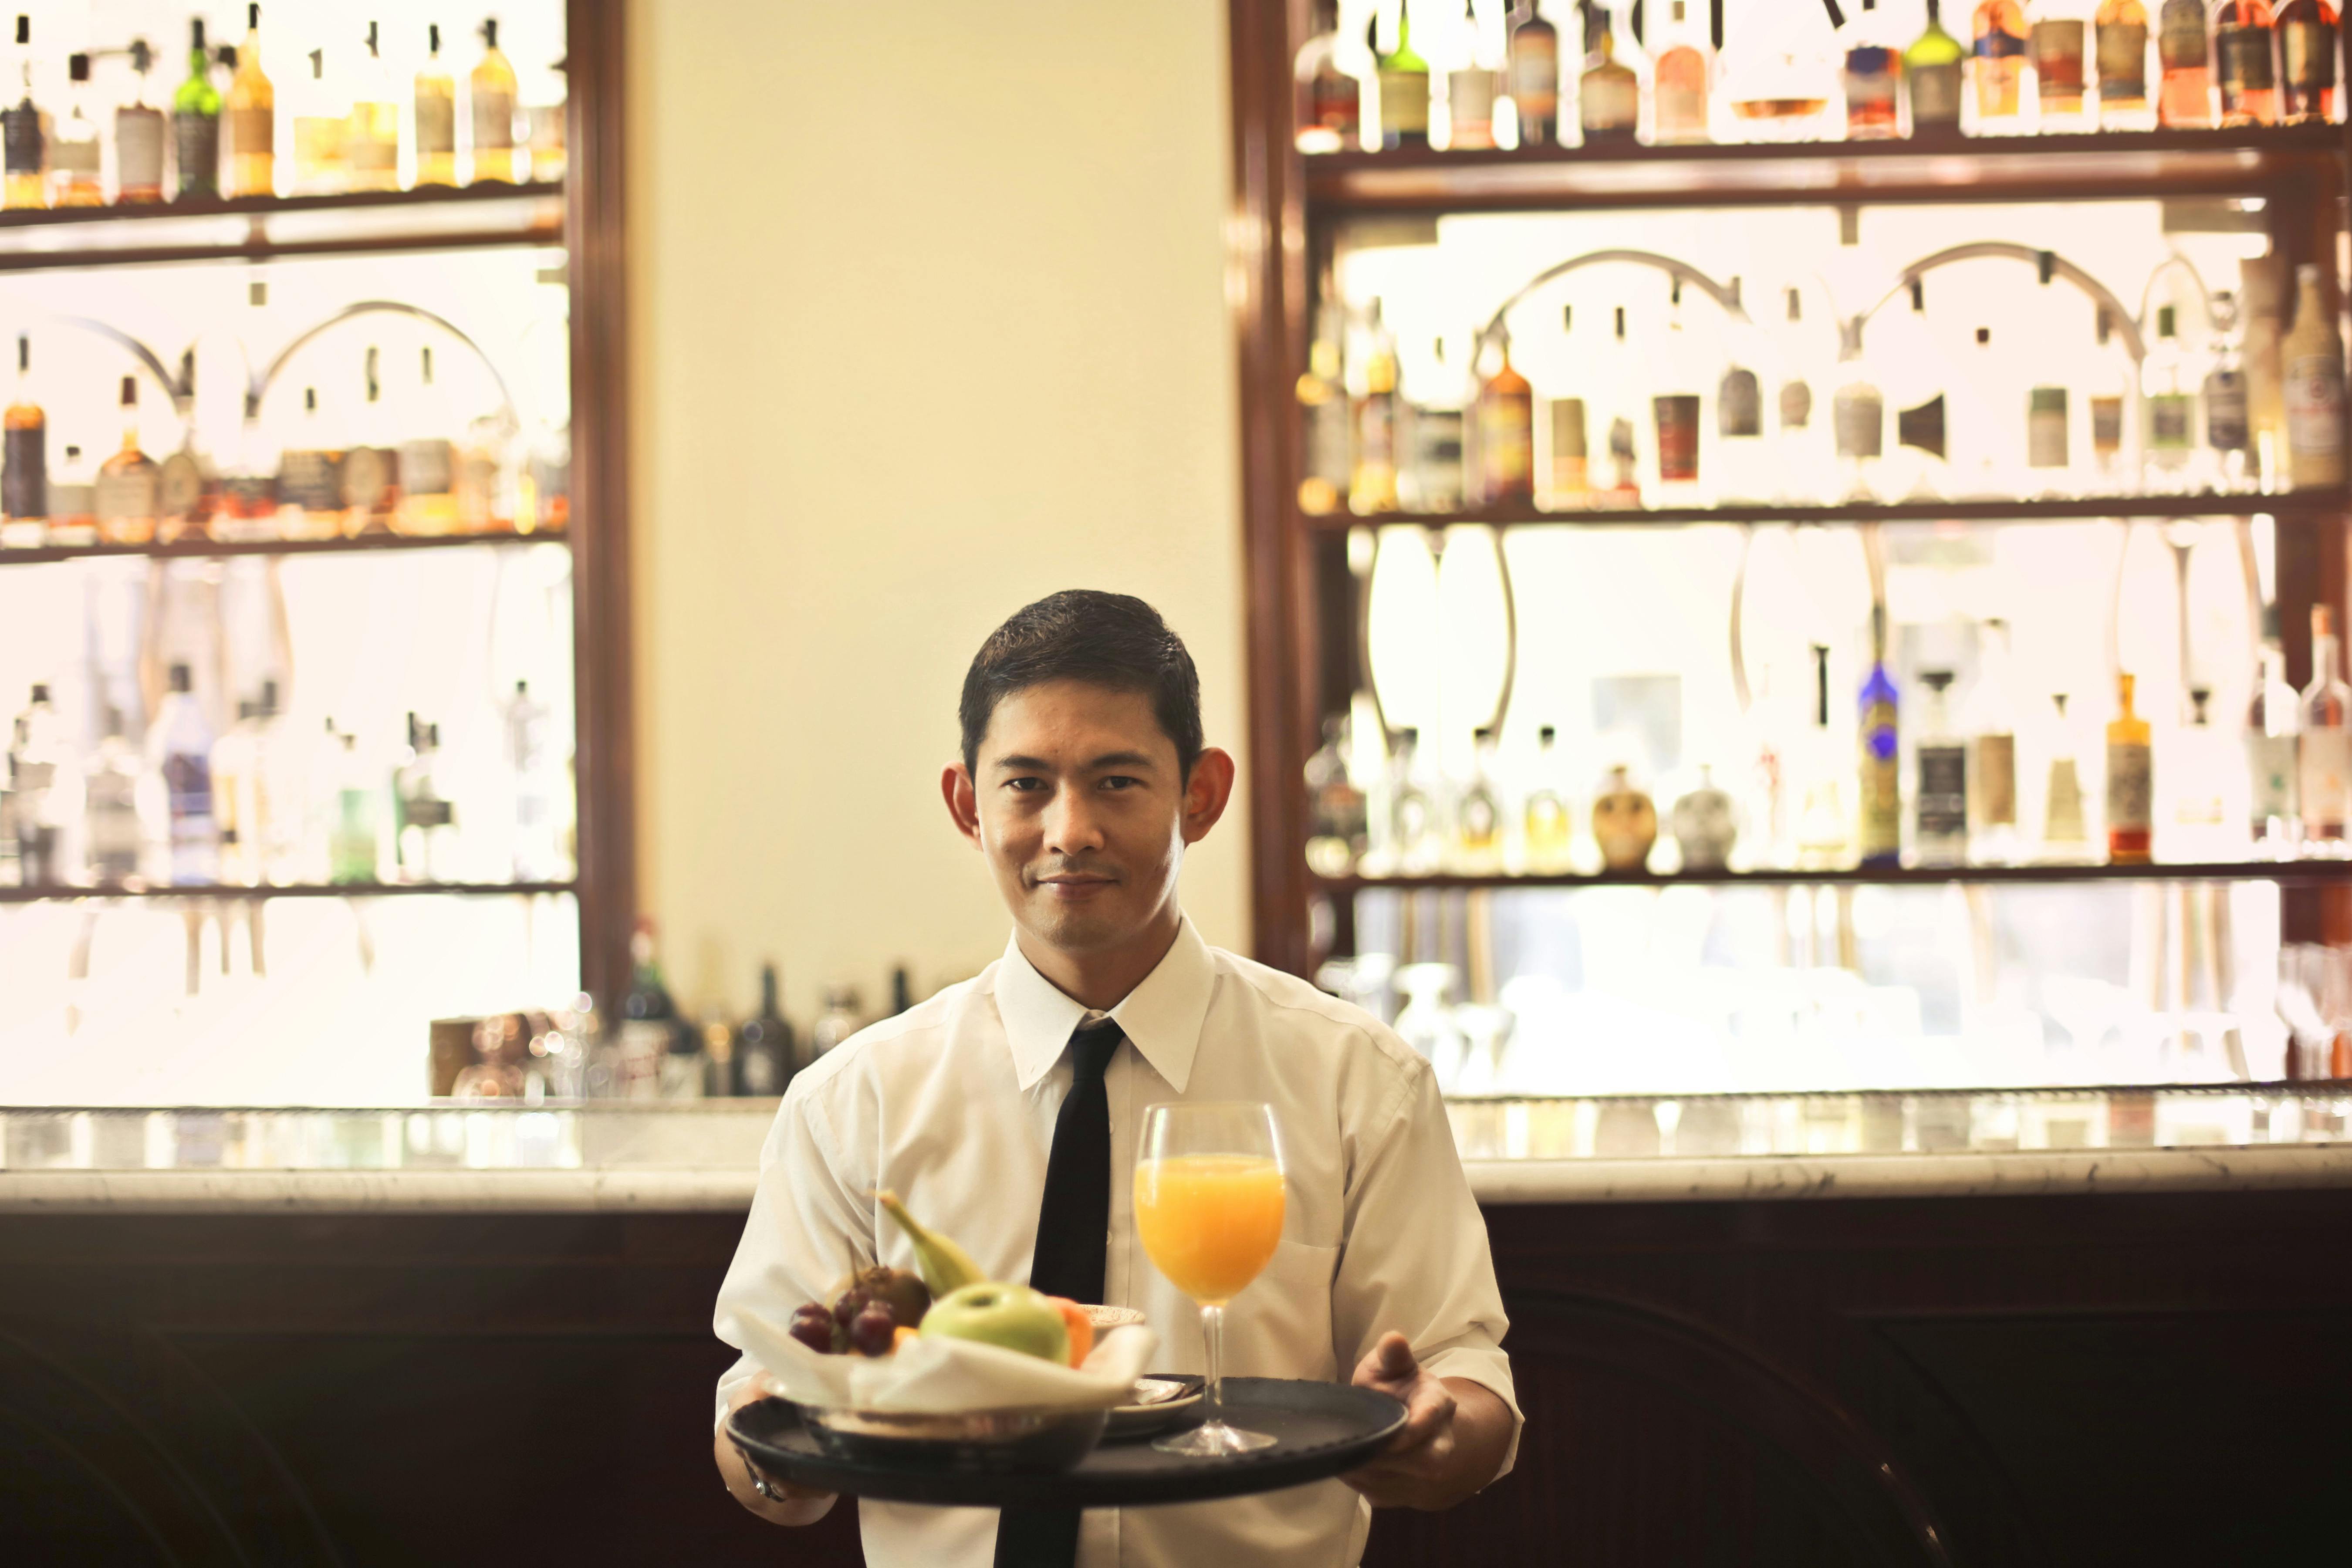 A waiter approaches with drinks on a platter